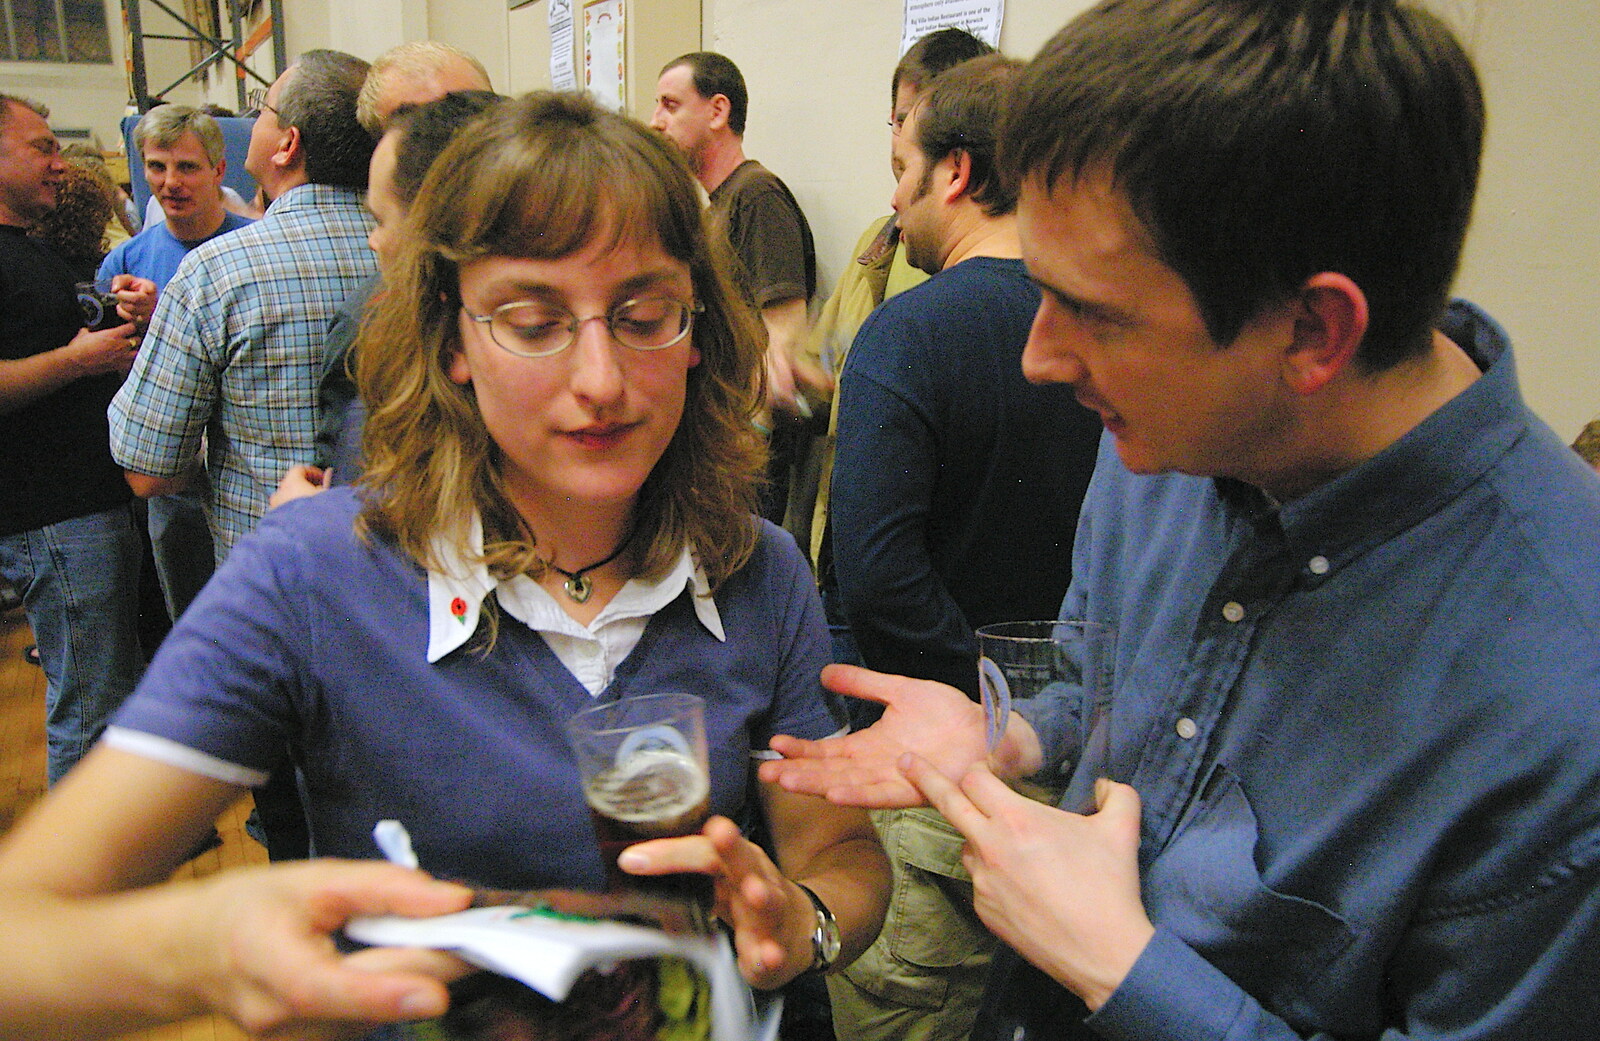 Suey and Andrew from The 28th Norwich Beer Festival, St. Andrew's Hall, Norwich - 26th October 2005